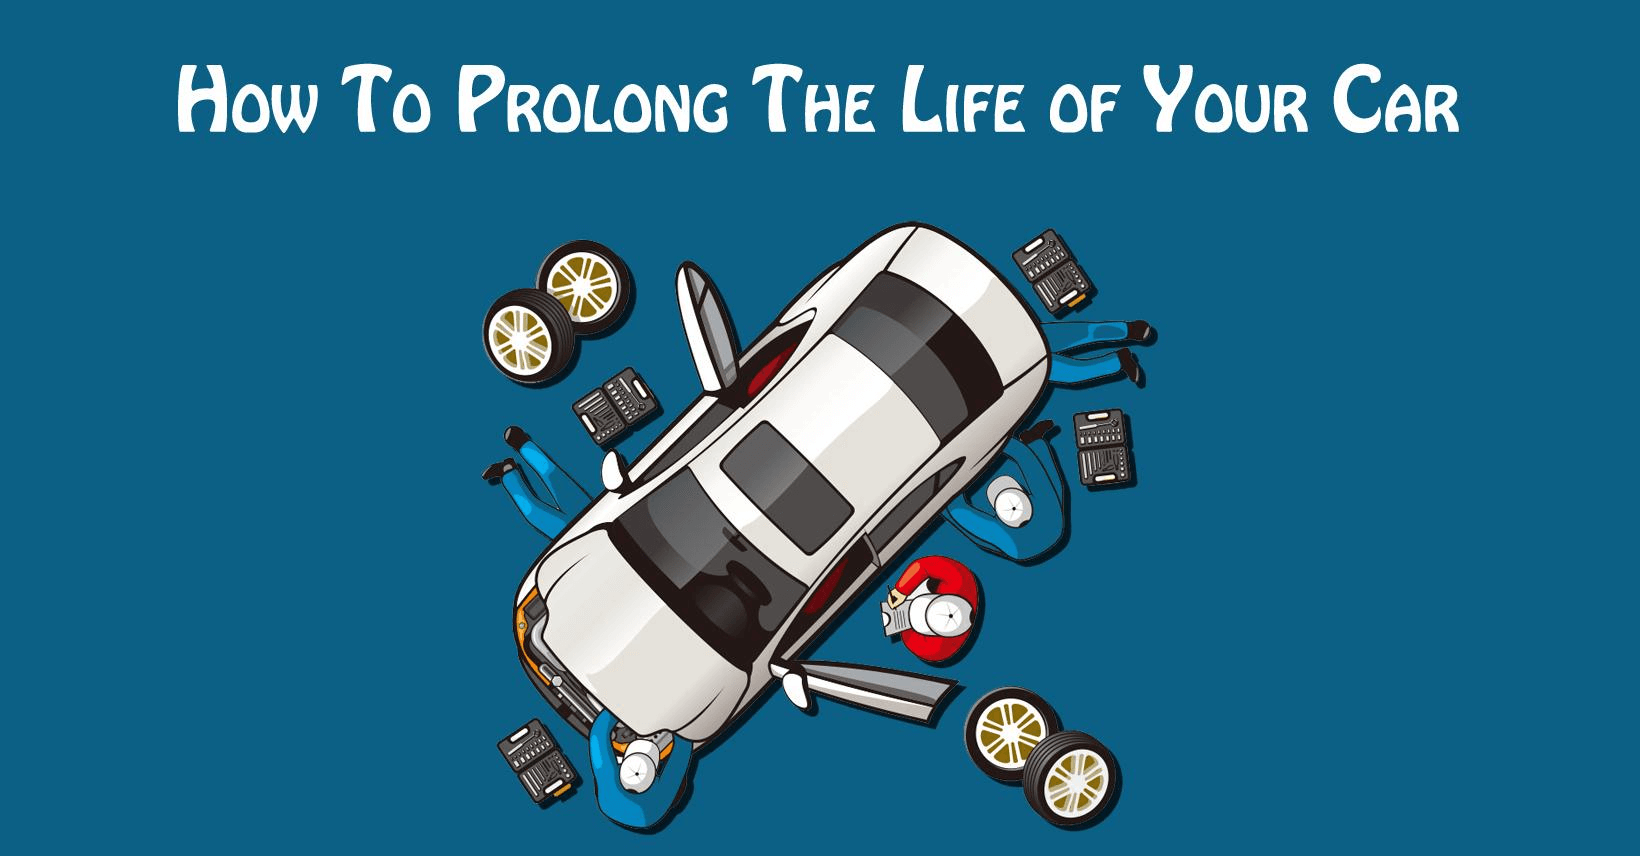 Prolong the Life of Your Car